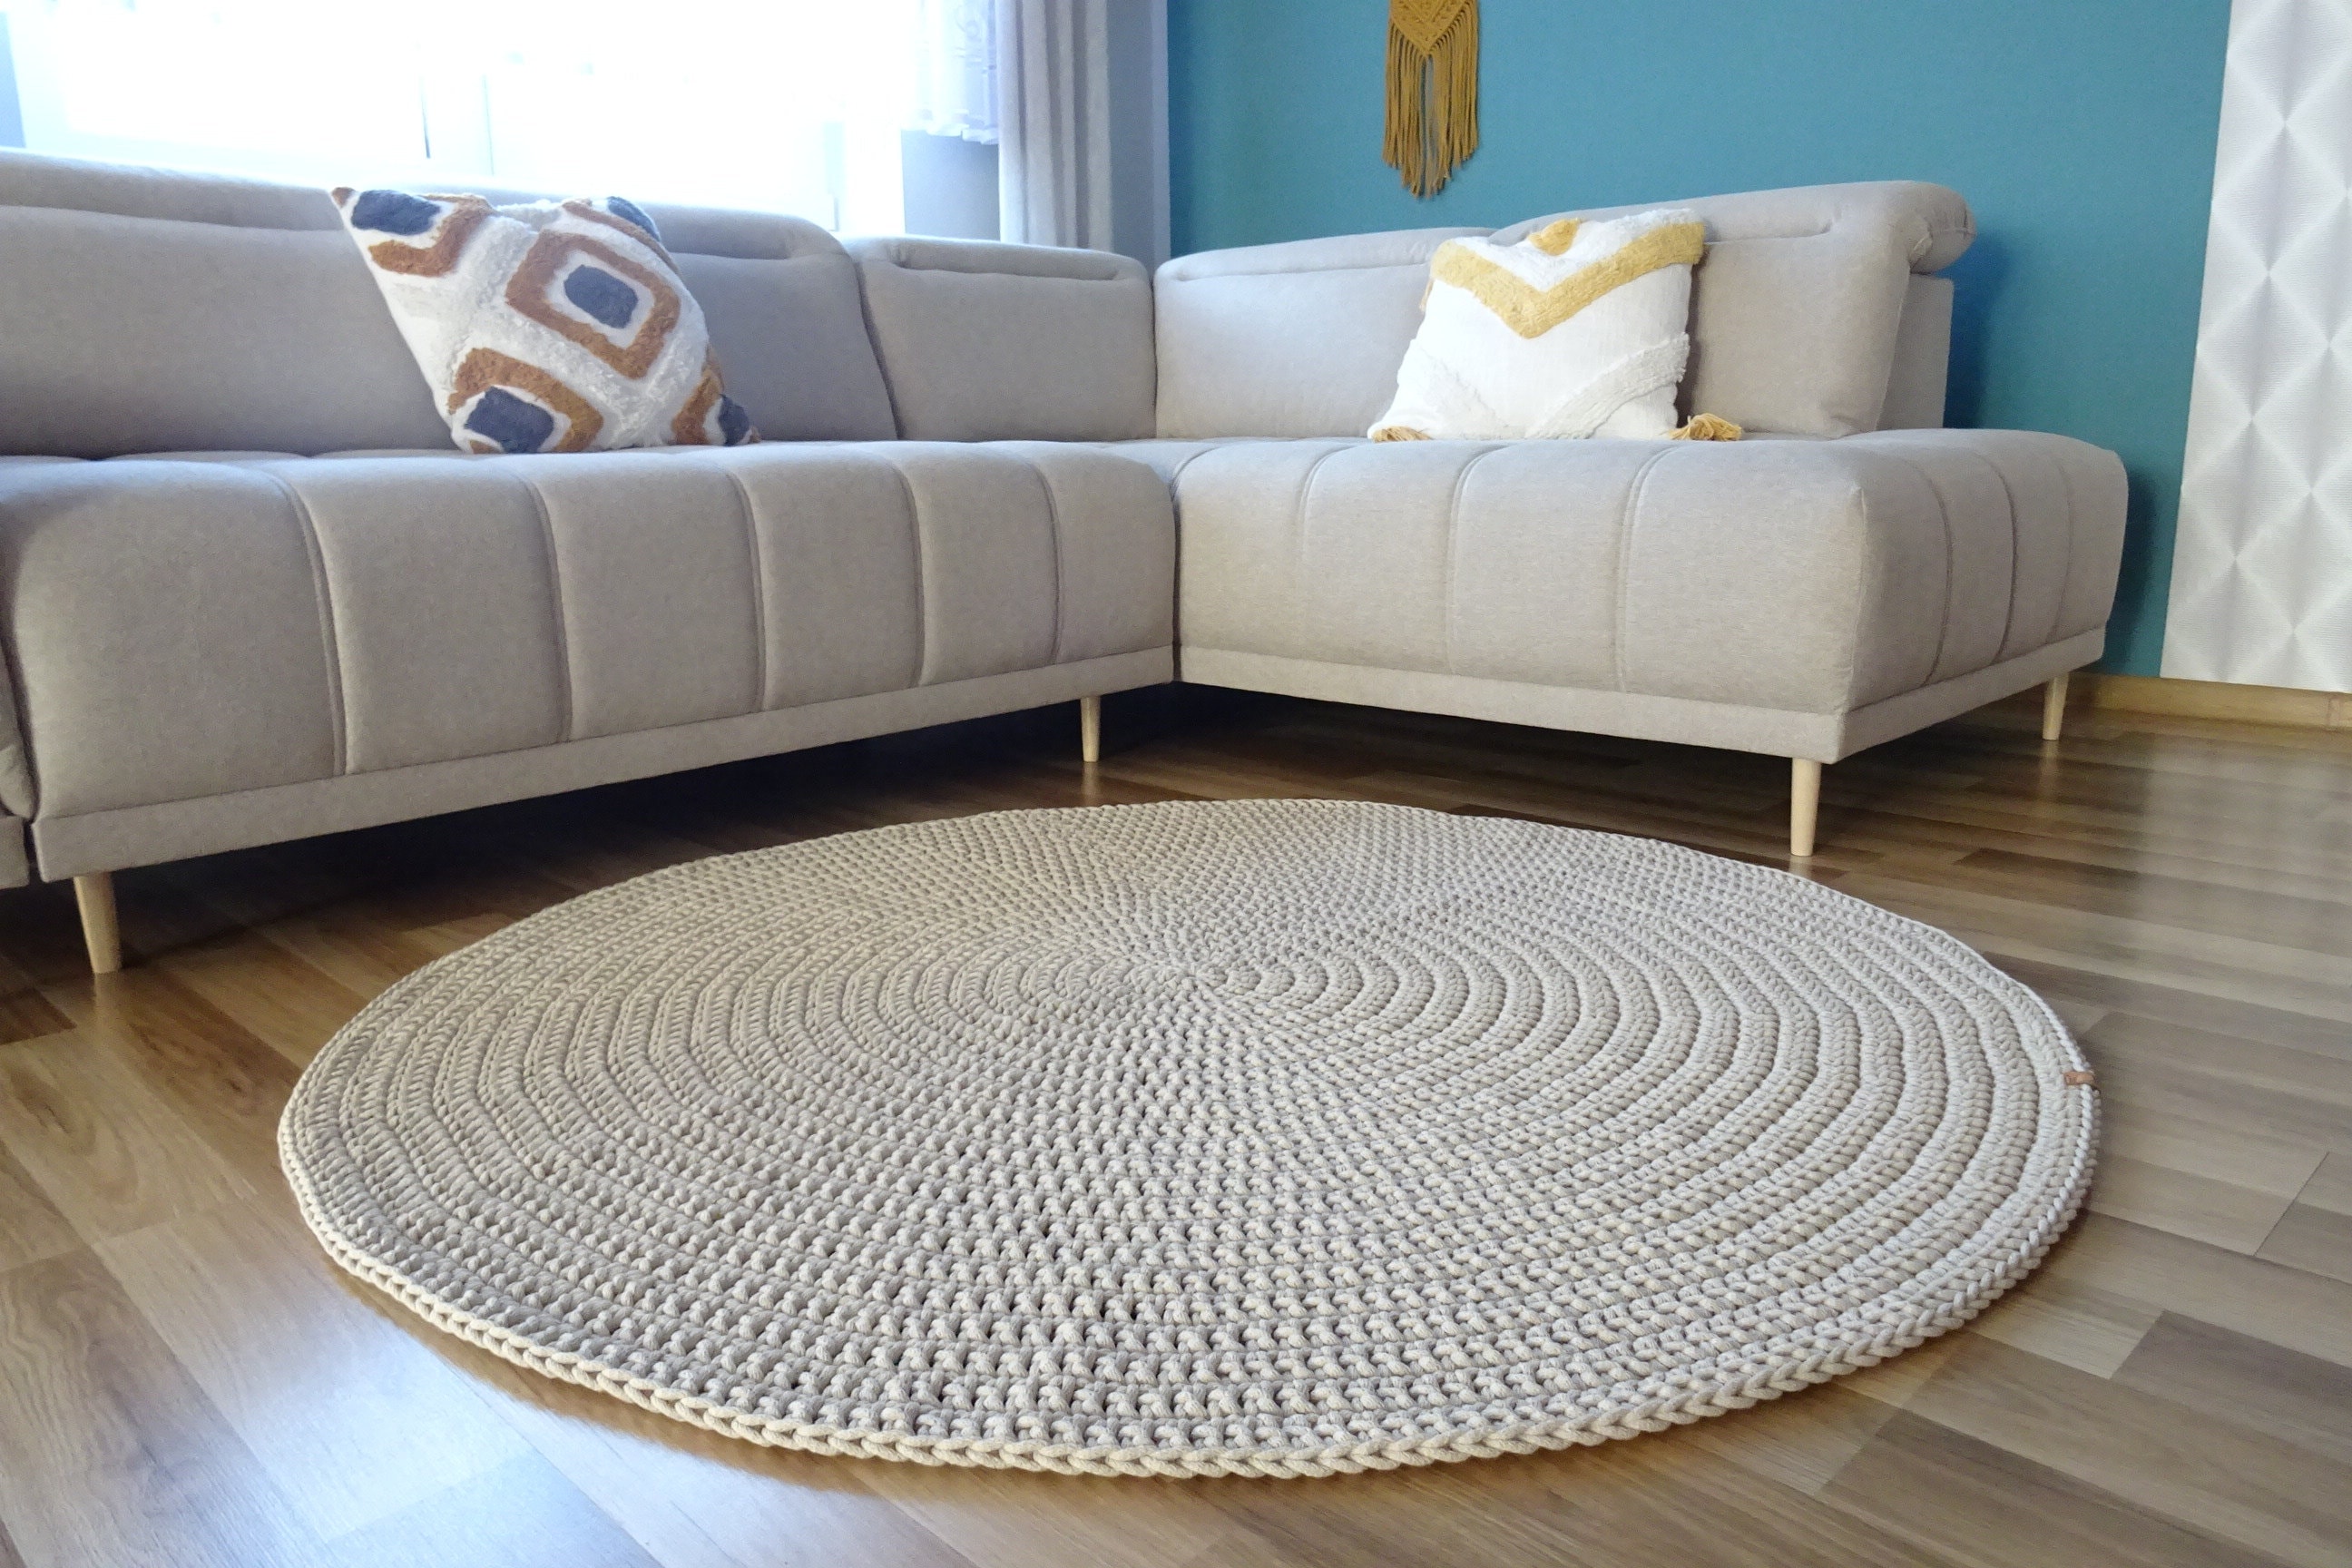 Beige Round Rug, Many Colors, Rugs for Living Room, Nursery Rug Boy, Large Round  Rug, Small Round Rug, Washable Rug, Playroom Rug, Carpet -  Canada